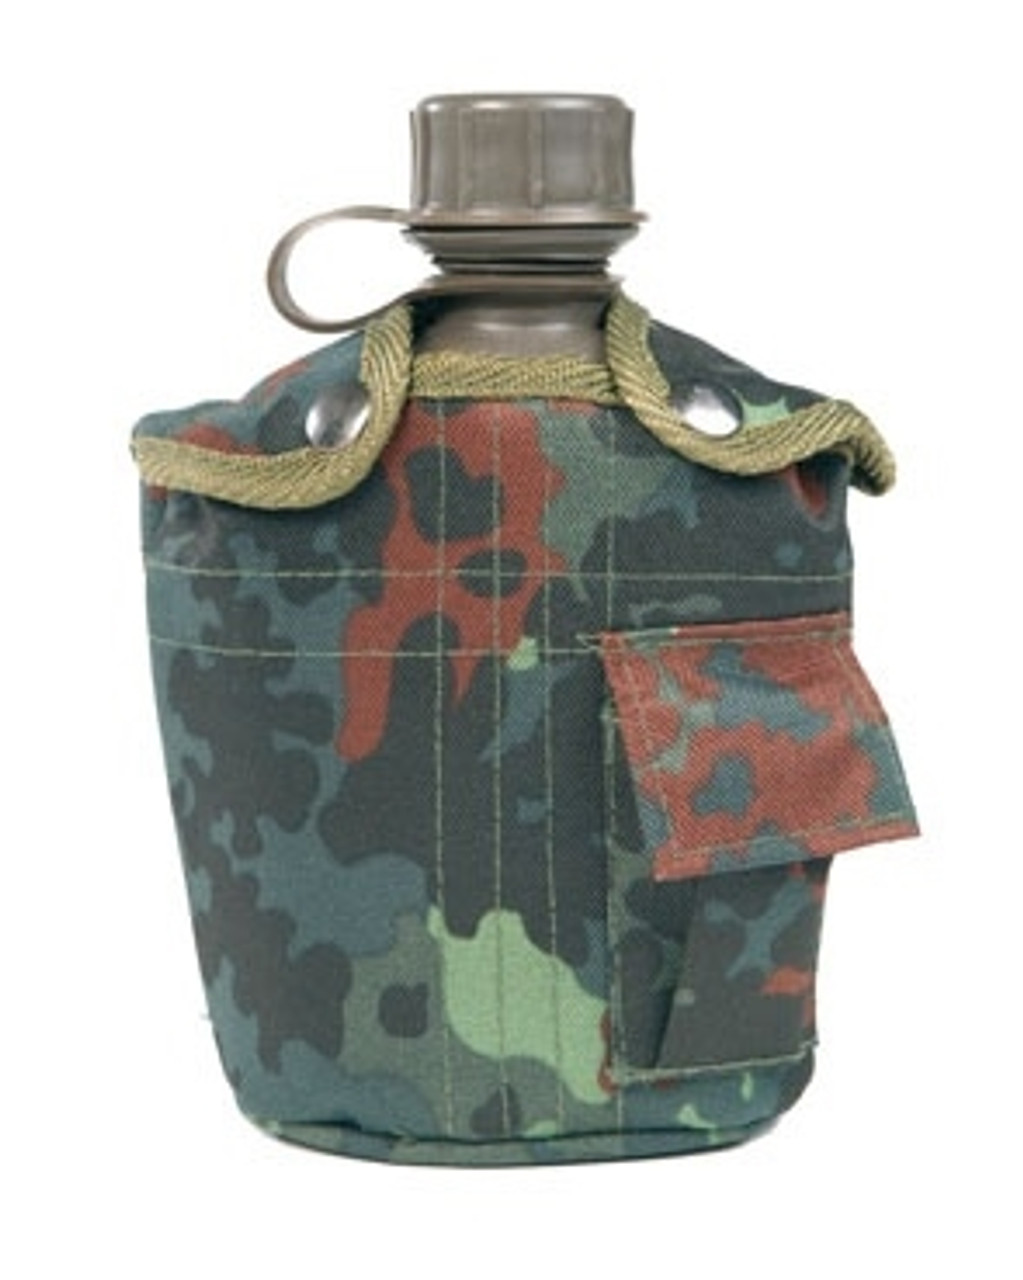 Mil-Tec US Style Plastic Canteen & Flecktarn Cover from Hessen Antique